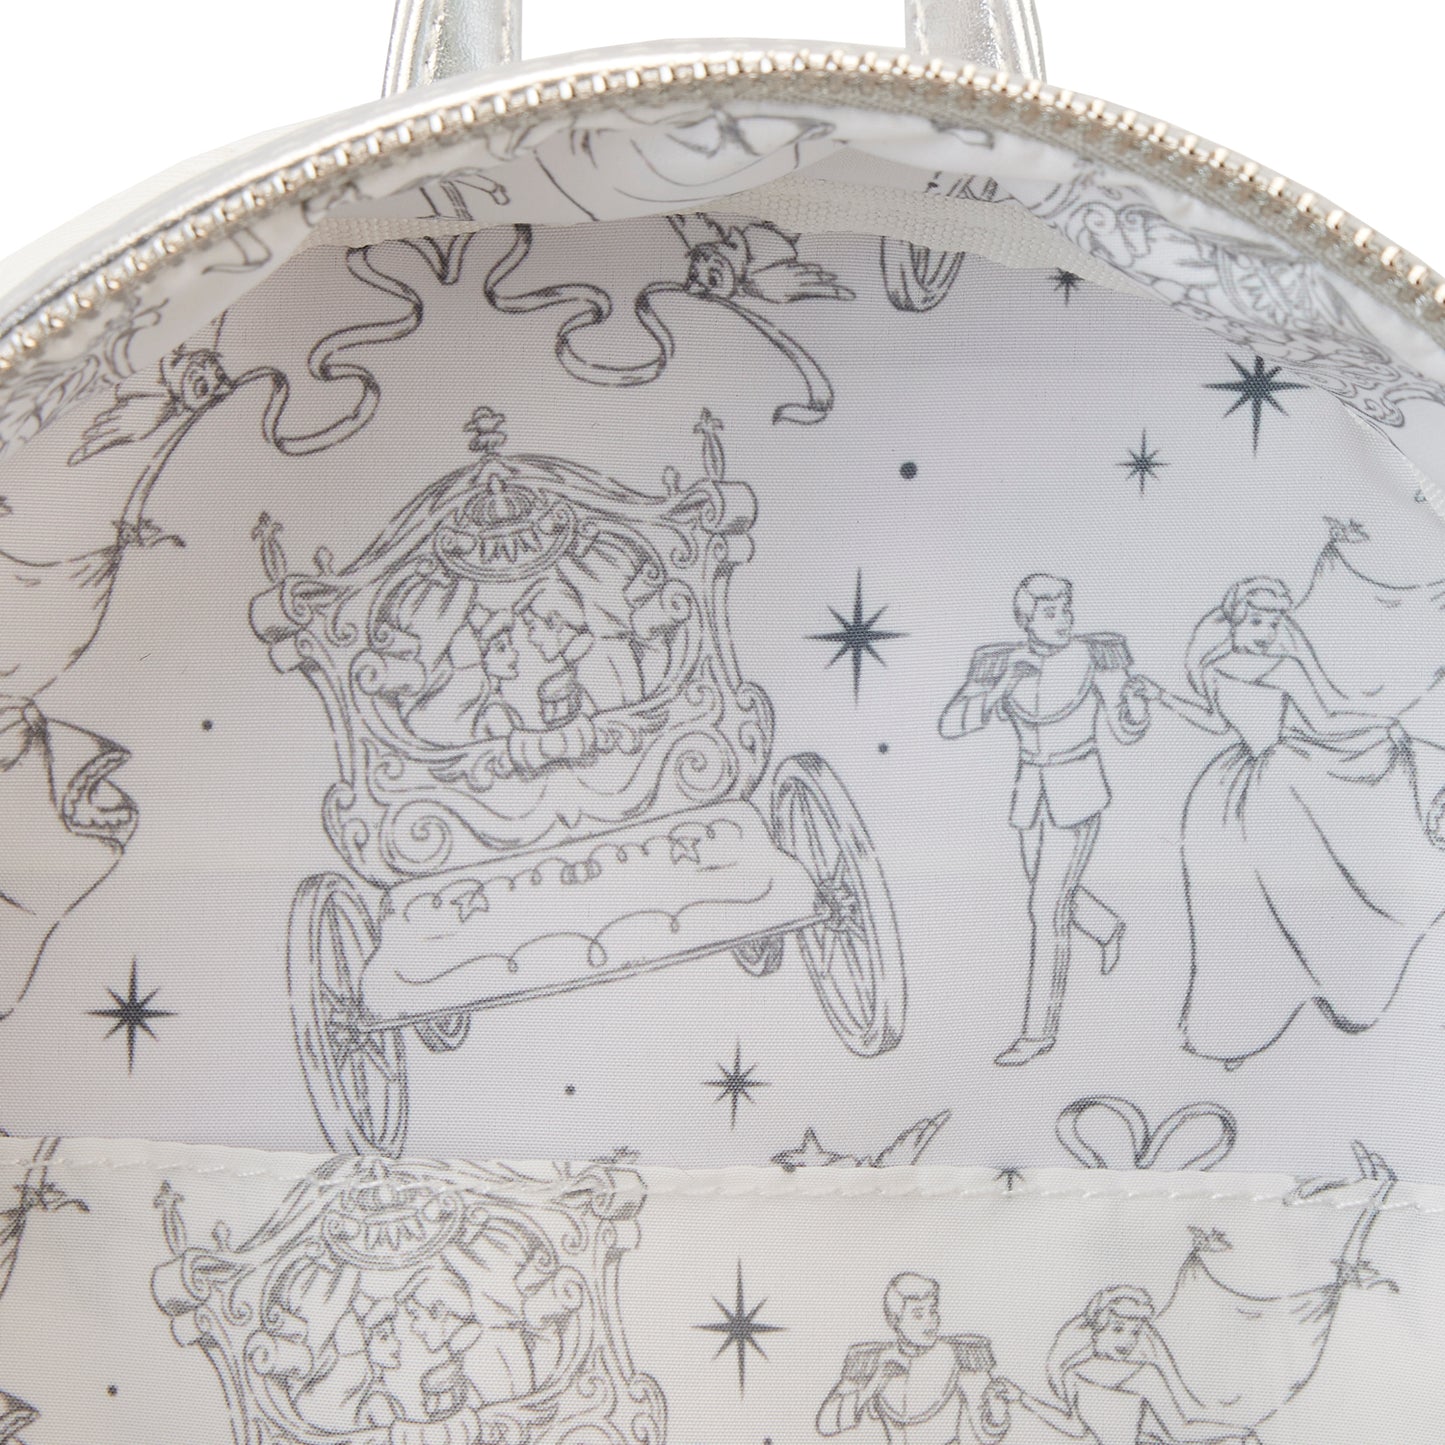 Loungefly Cinderella Happily Ever After Mini Backpack